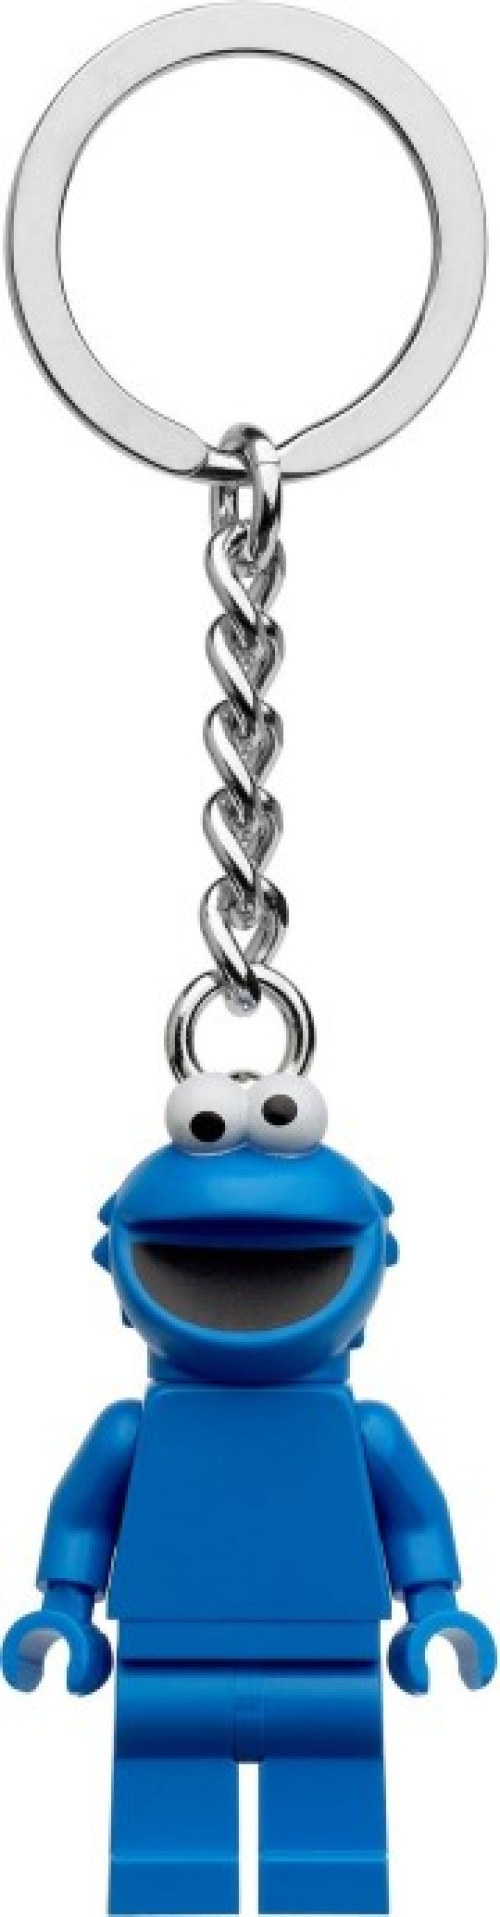 854146-1 Cookie Monster Key Chain